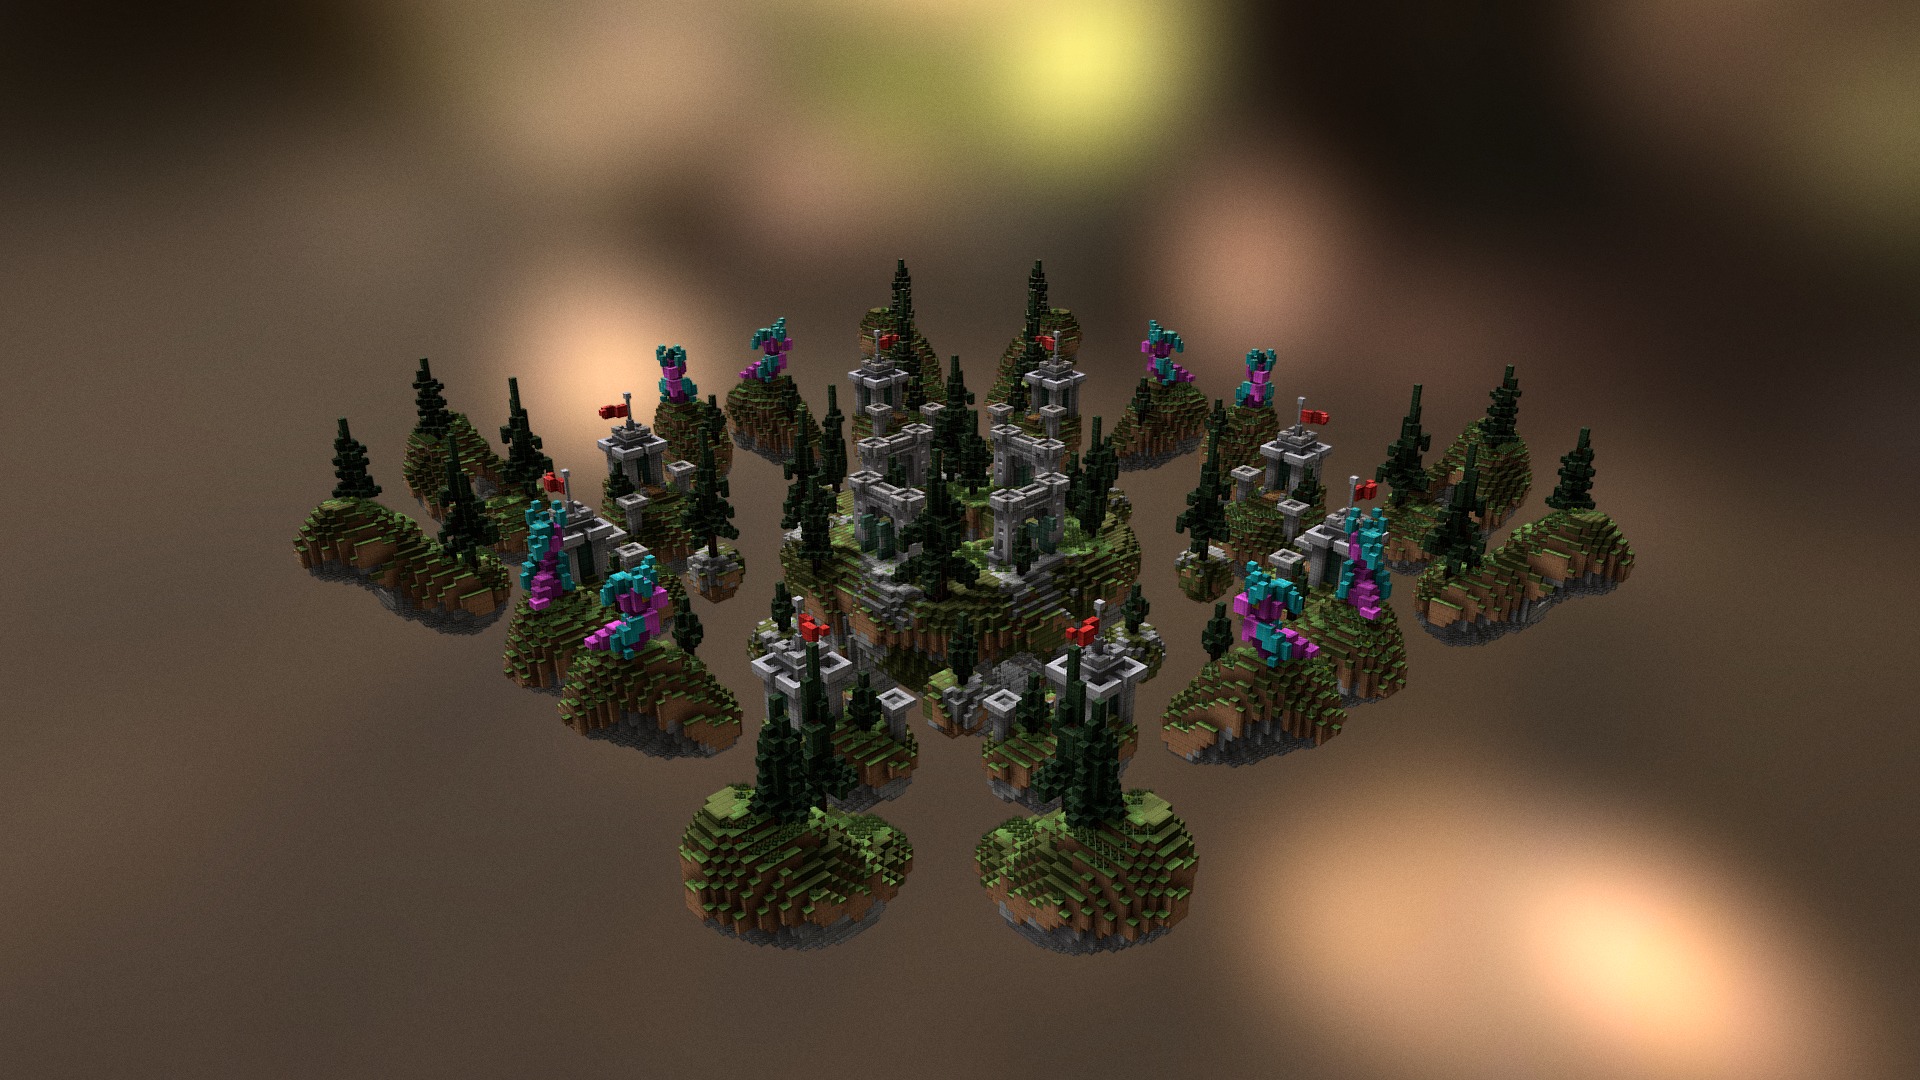 3D model CastleTeam&SoloSkywars - This is a 3D model of the CastleTeam&SoloSkywars. The 3D model is about a group of toy trees.